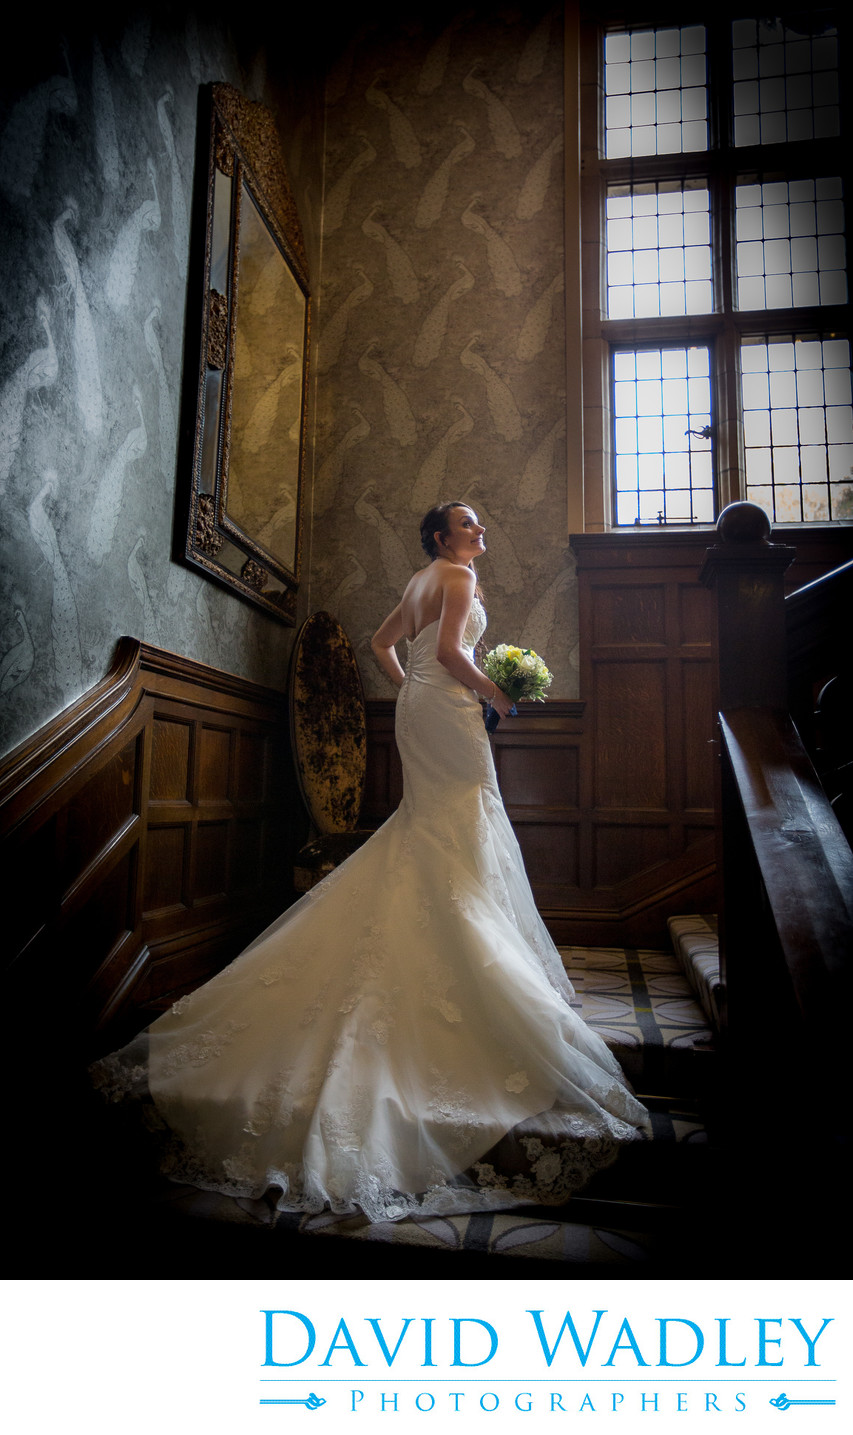 The stunning staircase at Moxhull Hall with the bride on her Wedding Day.